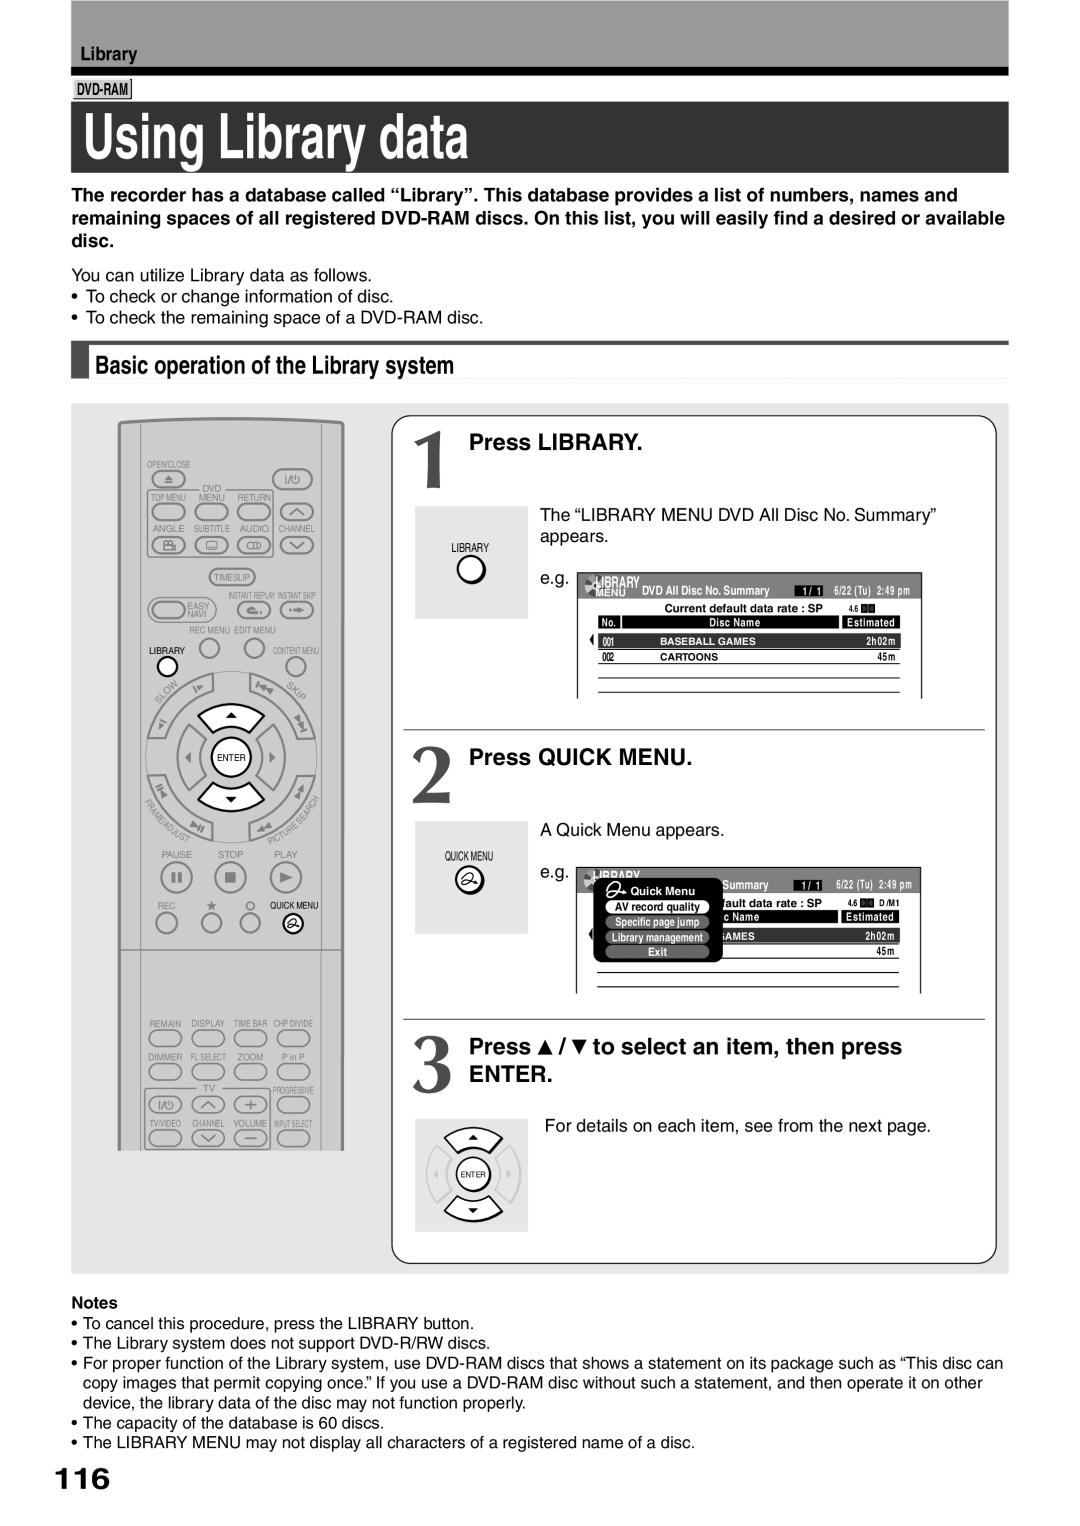 Toshiba D-KR2SU Using Library data, Basic operation of the Library system, Press LIBRARY, Press QUICK MENU, Dvd-Ram 